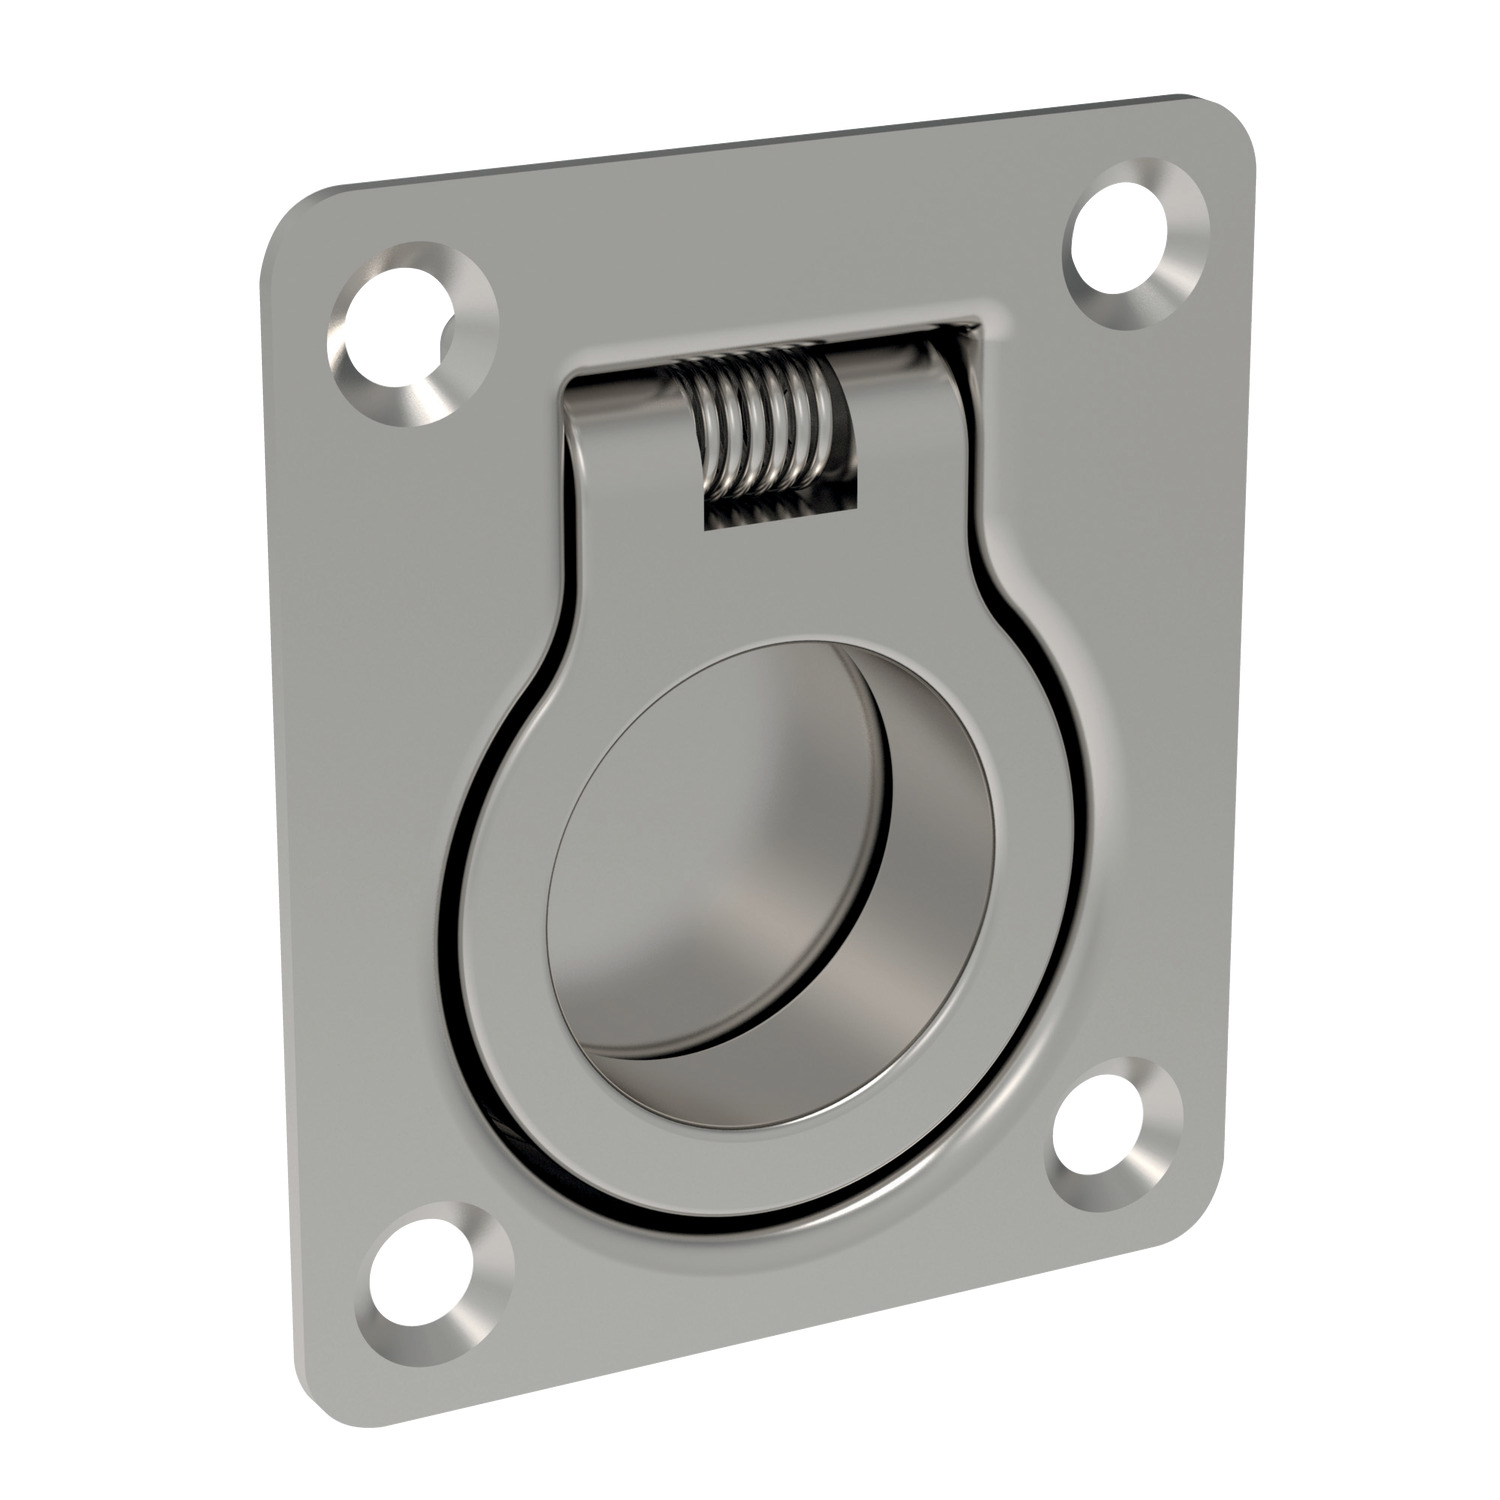 Product 79720, Ring Pulls, Recessed stainless steel / 